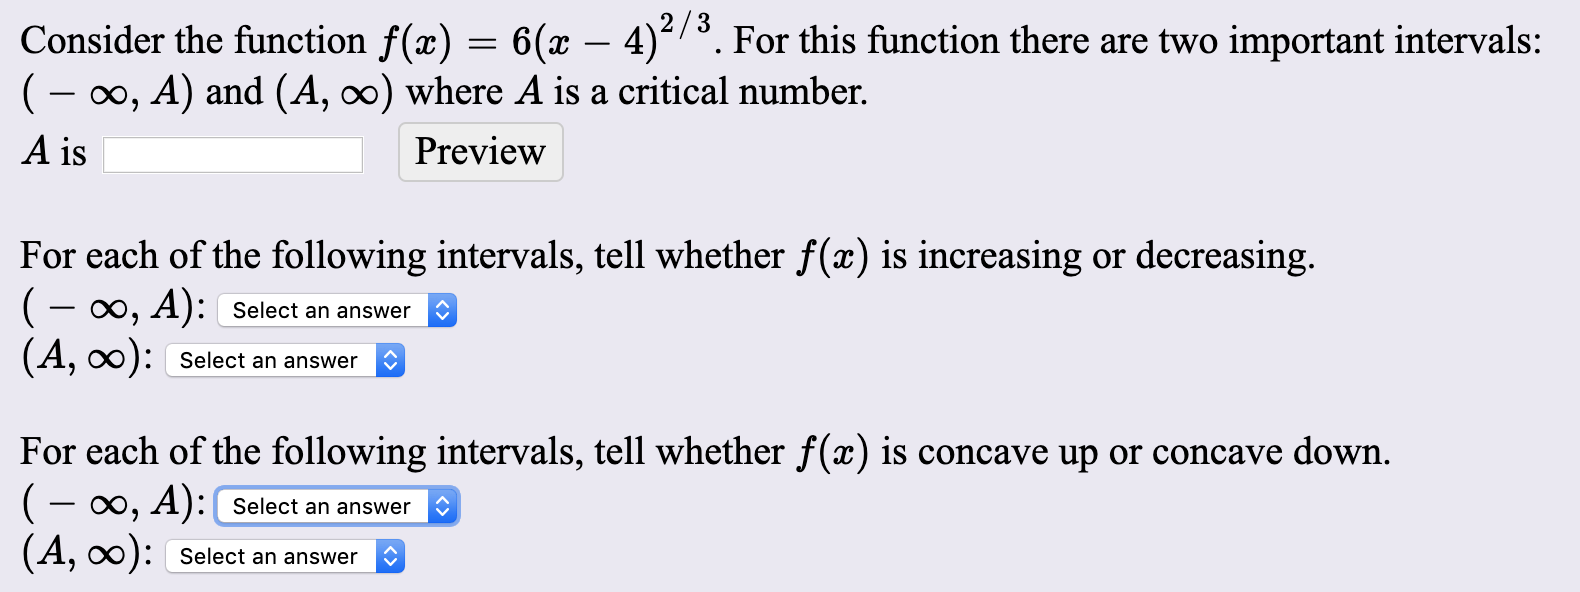 2/3
Consider the function f(x) = 6(x – 4)²/³. For this function there are two important intervals:
(- 00, A) and (A, ∞) where A is a critical number.
A is
Preview
For each of the following intervals, tell whether f(x) is increasing or decreasing.
(- 0, A): Select an answer
(A, ):
Select an answer
For each of the following intervals, tell whether ƒ(x) is concave up
(- 0, A):( Select an answer
(A, ):
concave down.
Select an answer
